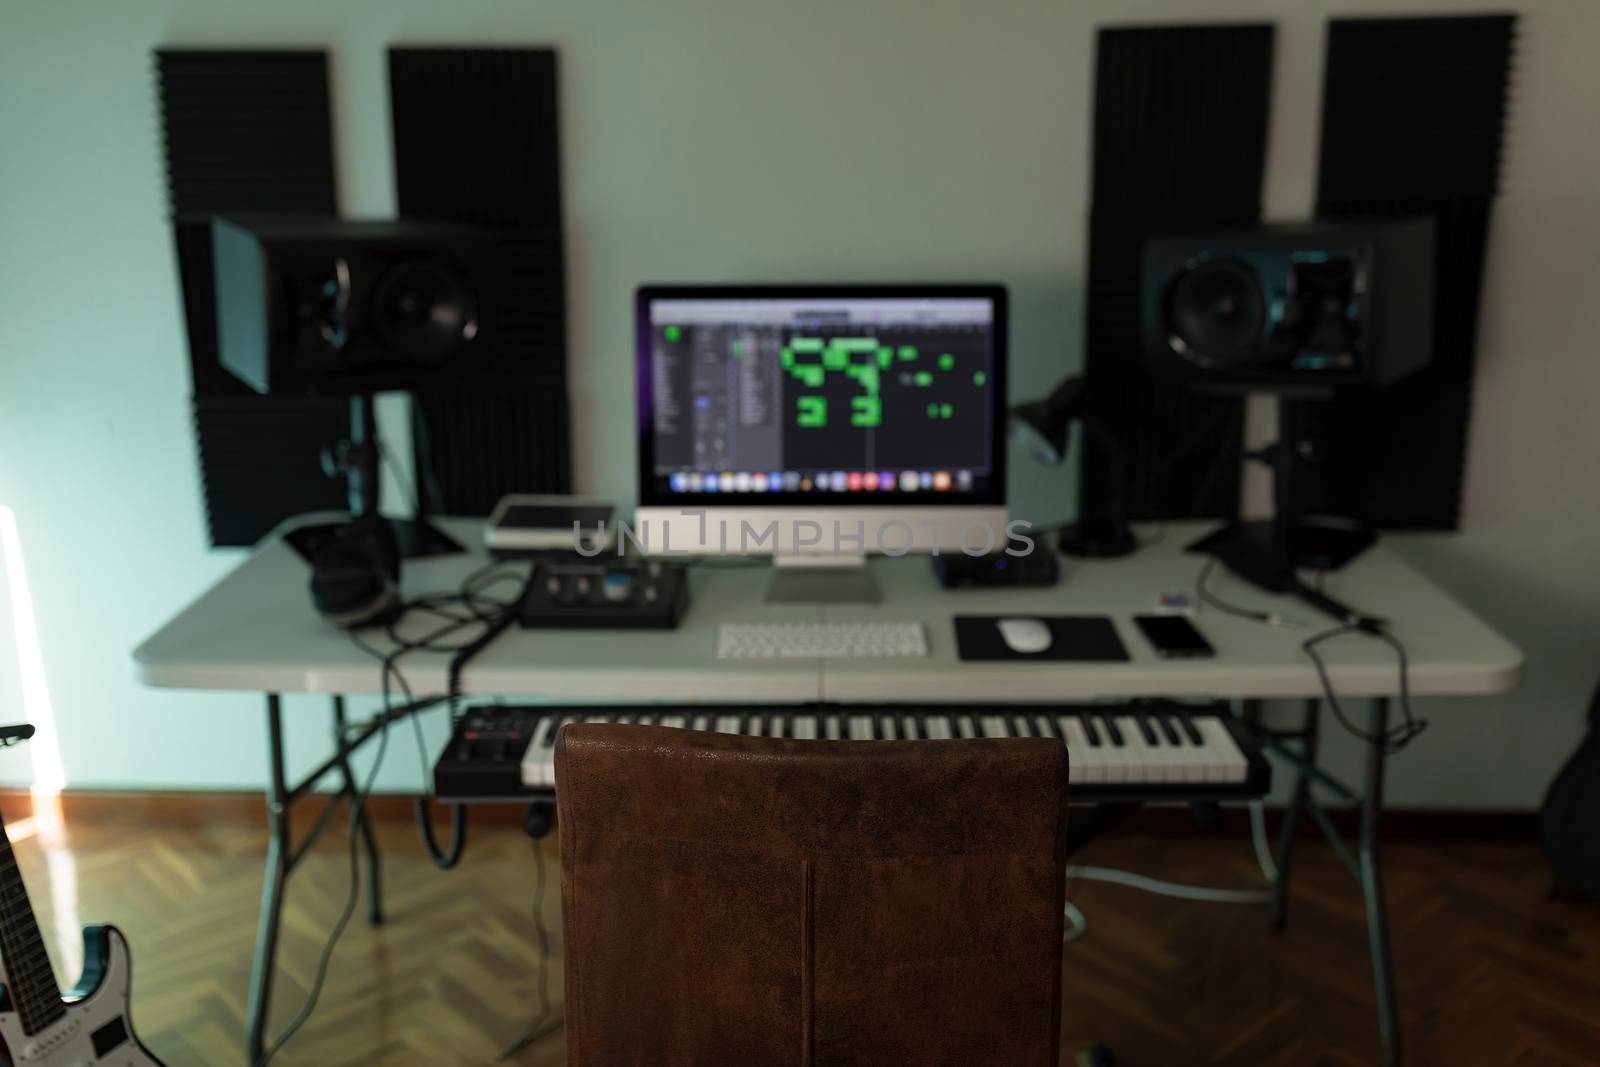 The chair of a music producer dominates the scene amongst the other tools that conform an average home studio